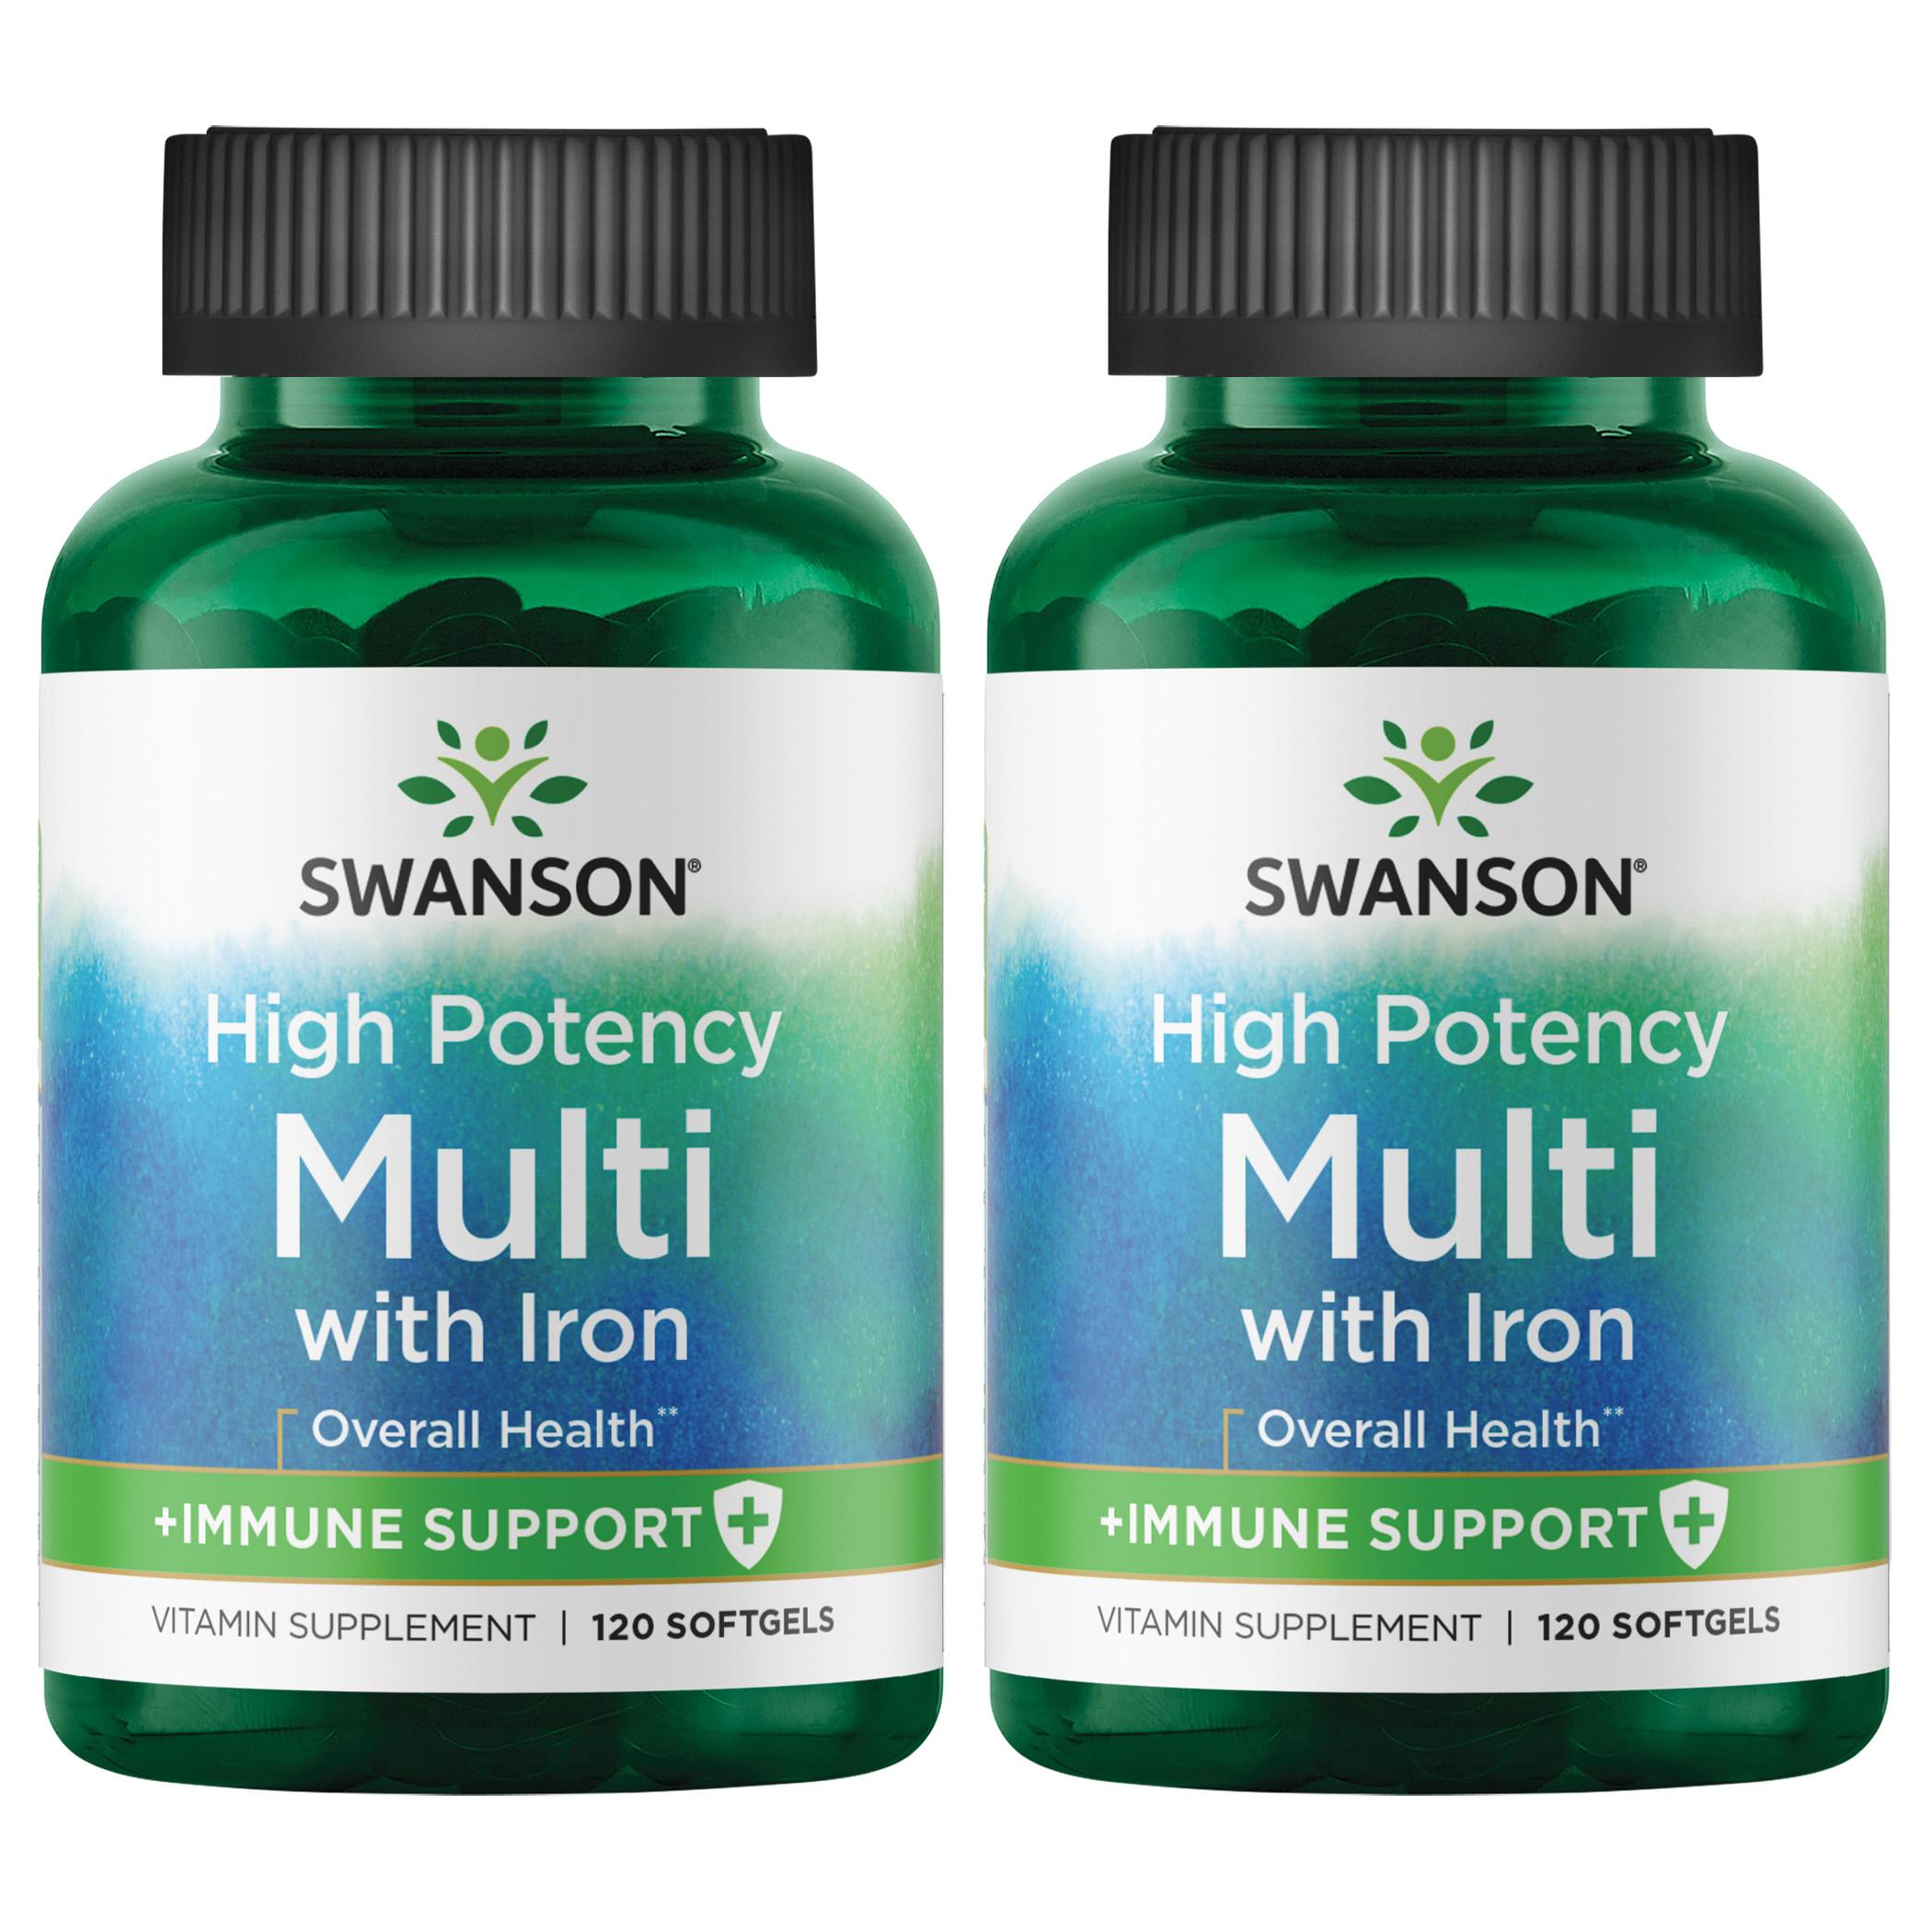 Swanson Premium High Potency Multi plus Immune Support - With Iron 2 Pack Vitamin 120 Soft Gels